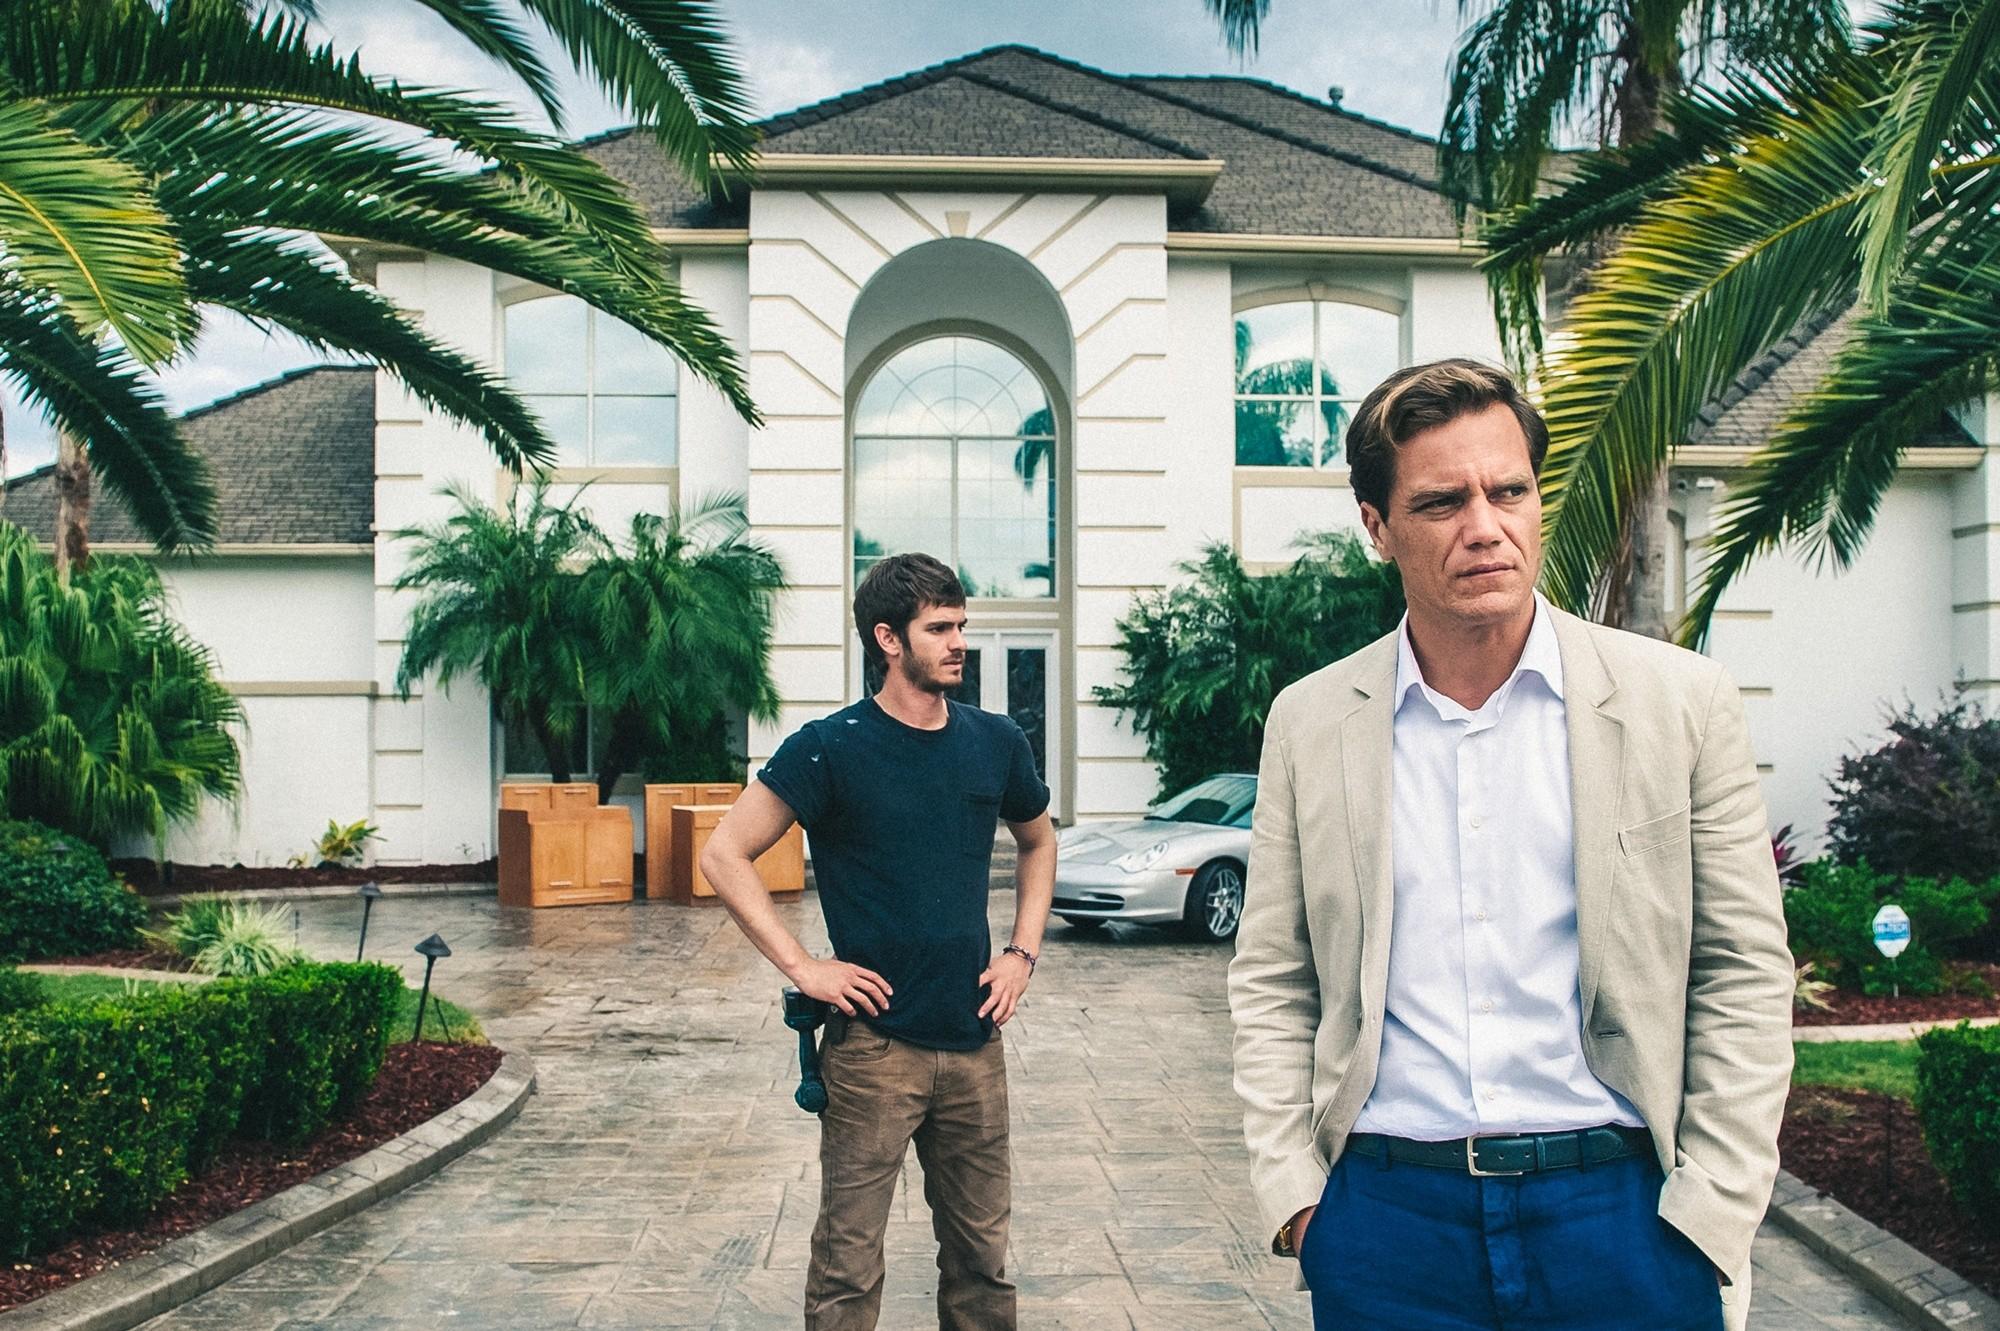 Andrew Garfield stars as Dennis Nash and Michael Shannon stars as Rick Carver in Broad Green Pictures' 99 Homes (2015)